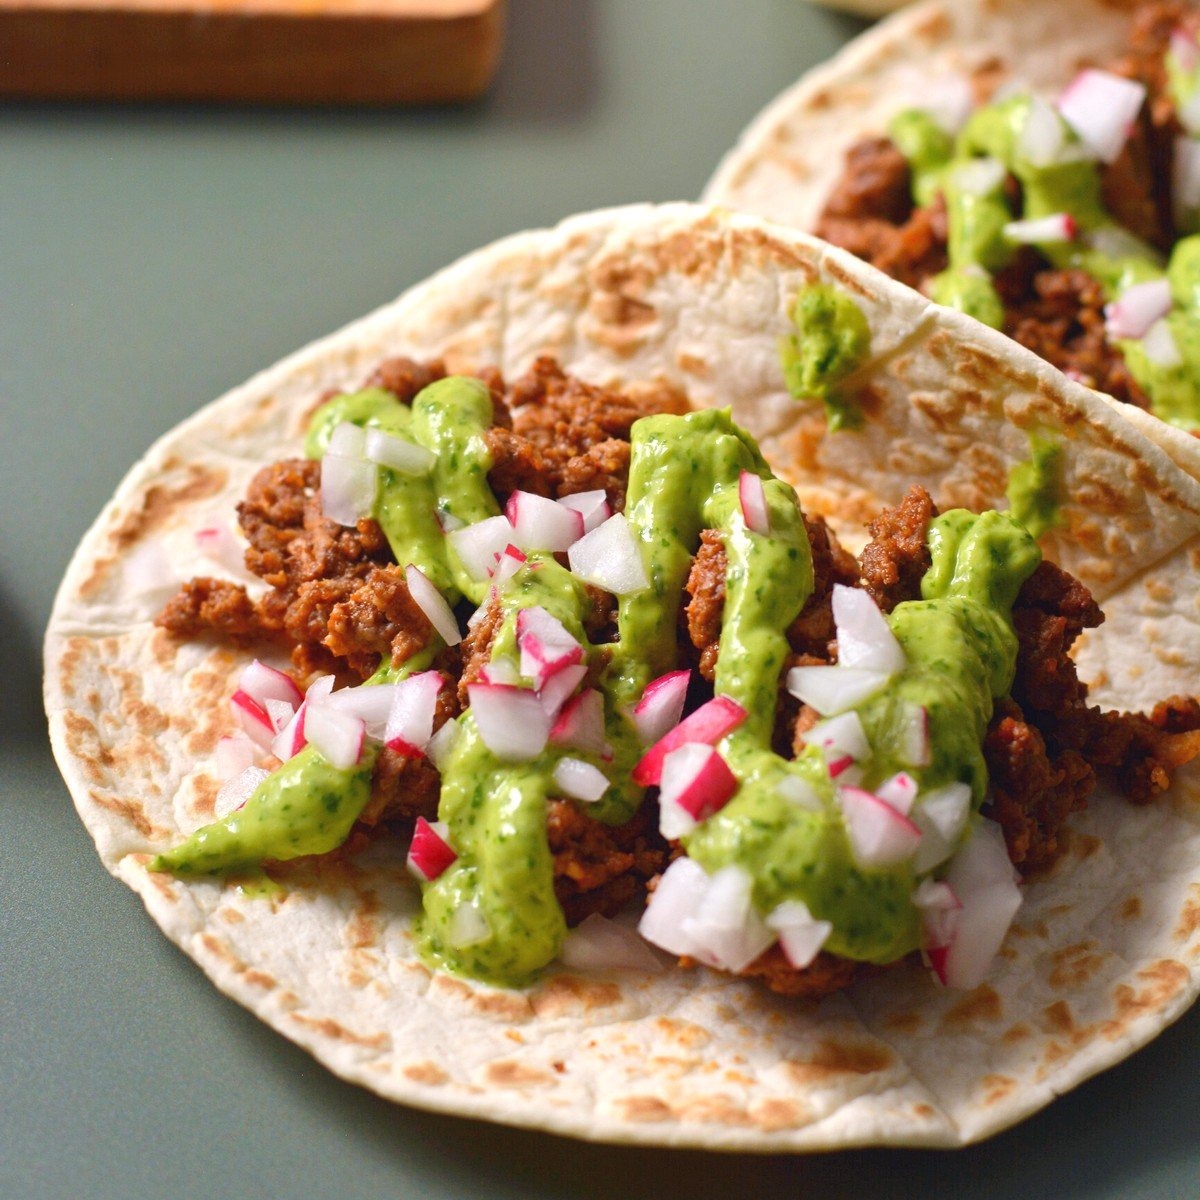 Ground bison tacos with radish pieces and green salsa.